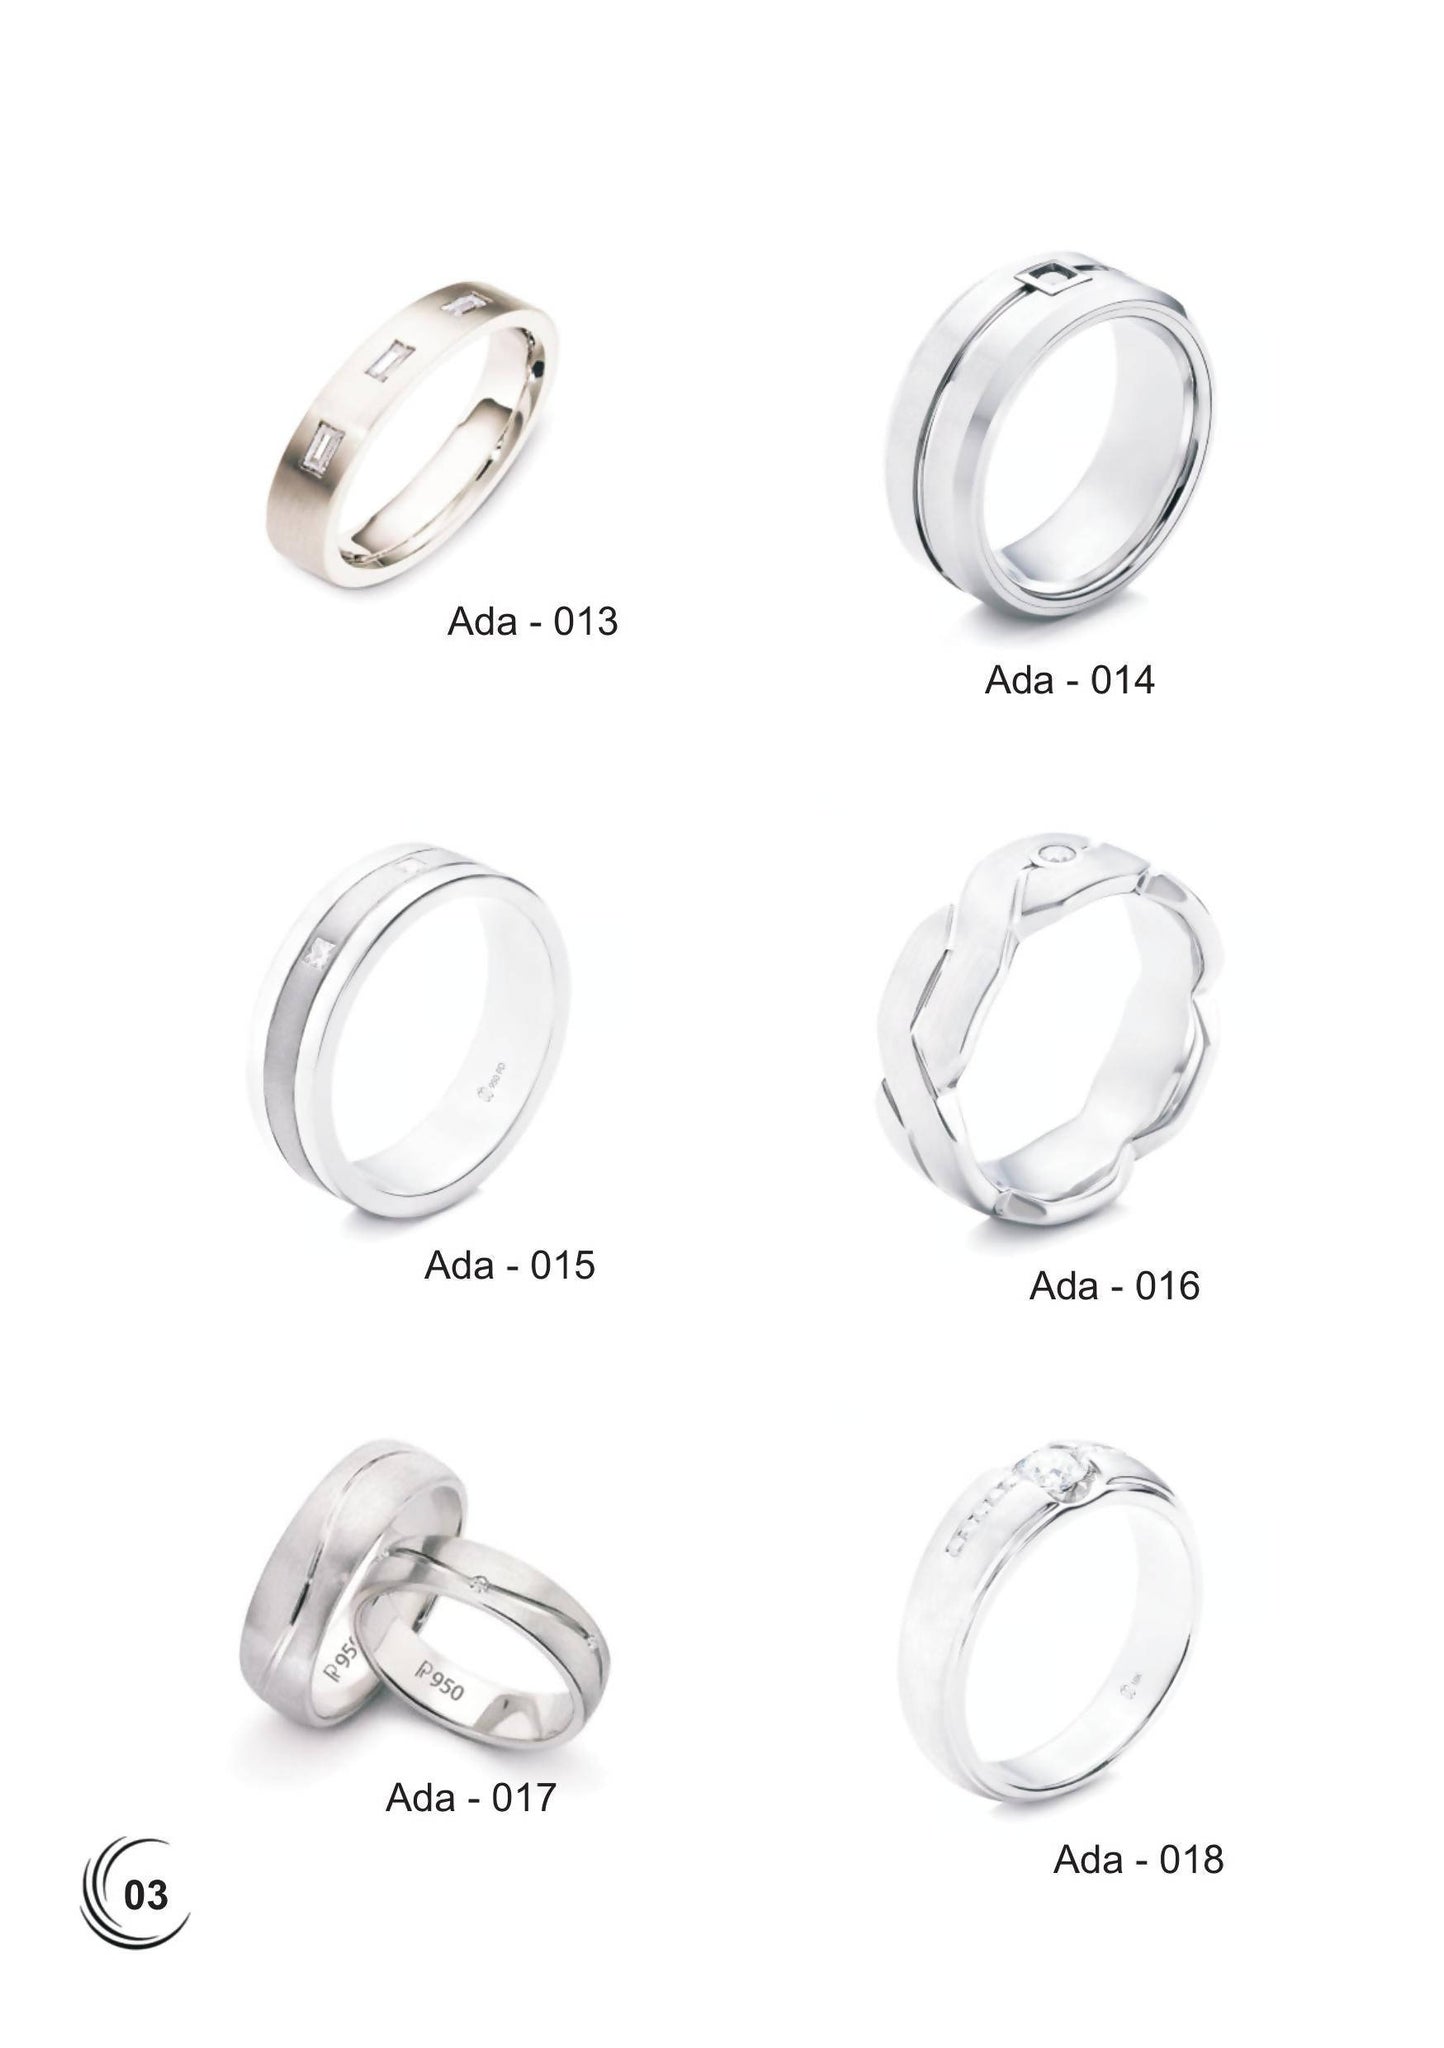 Platinum 950 Rings and Bands